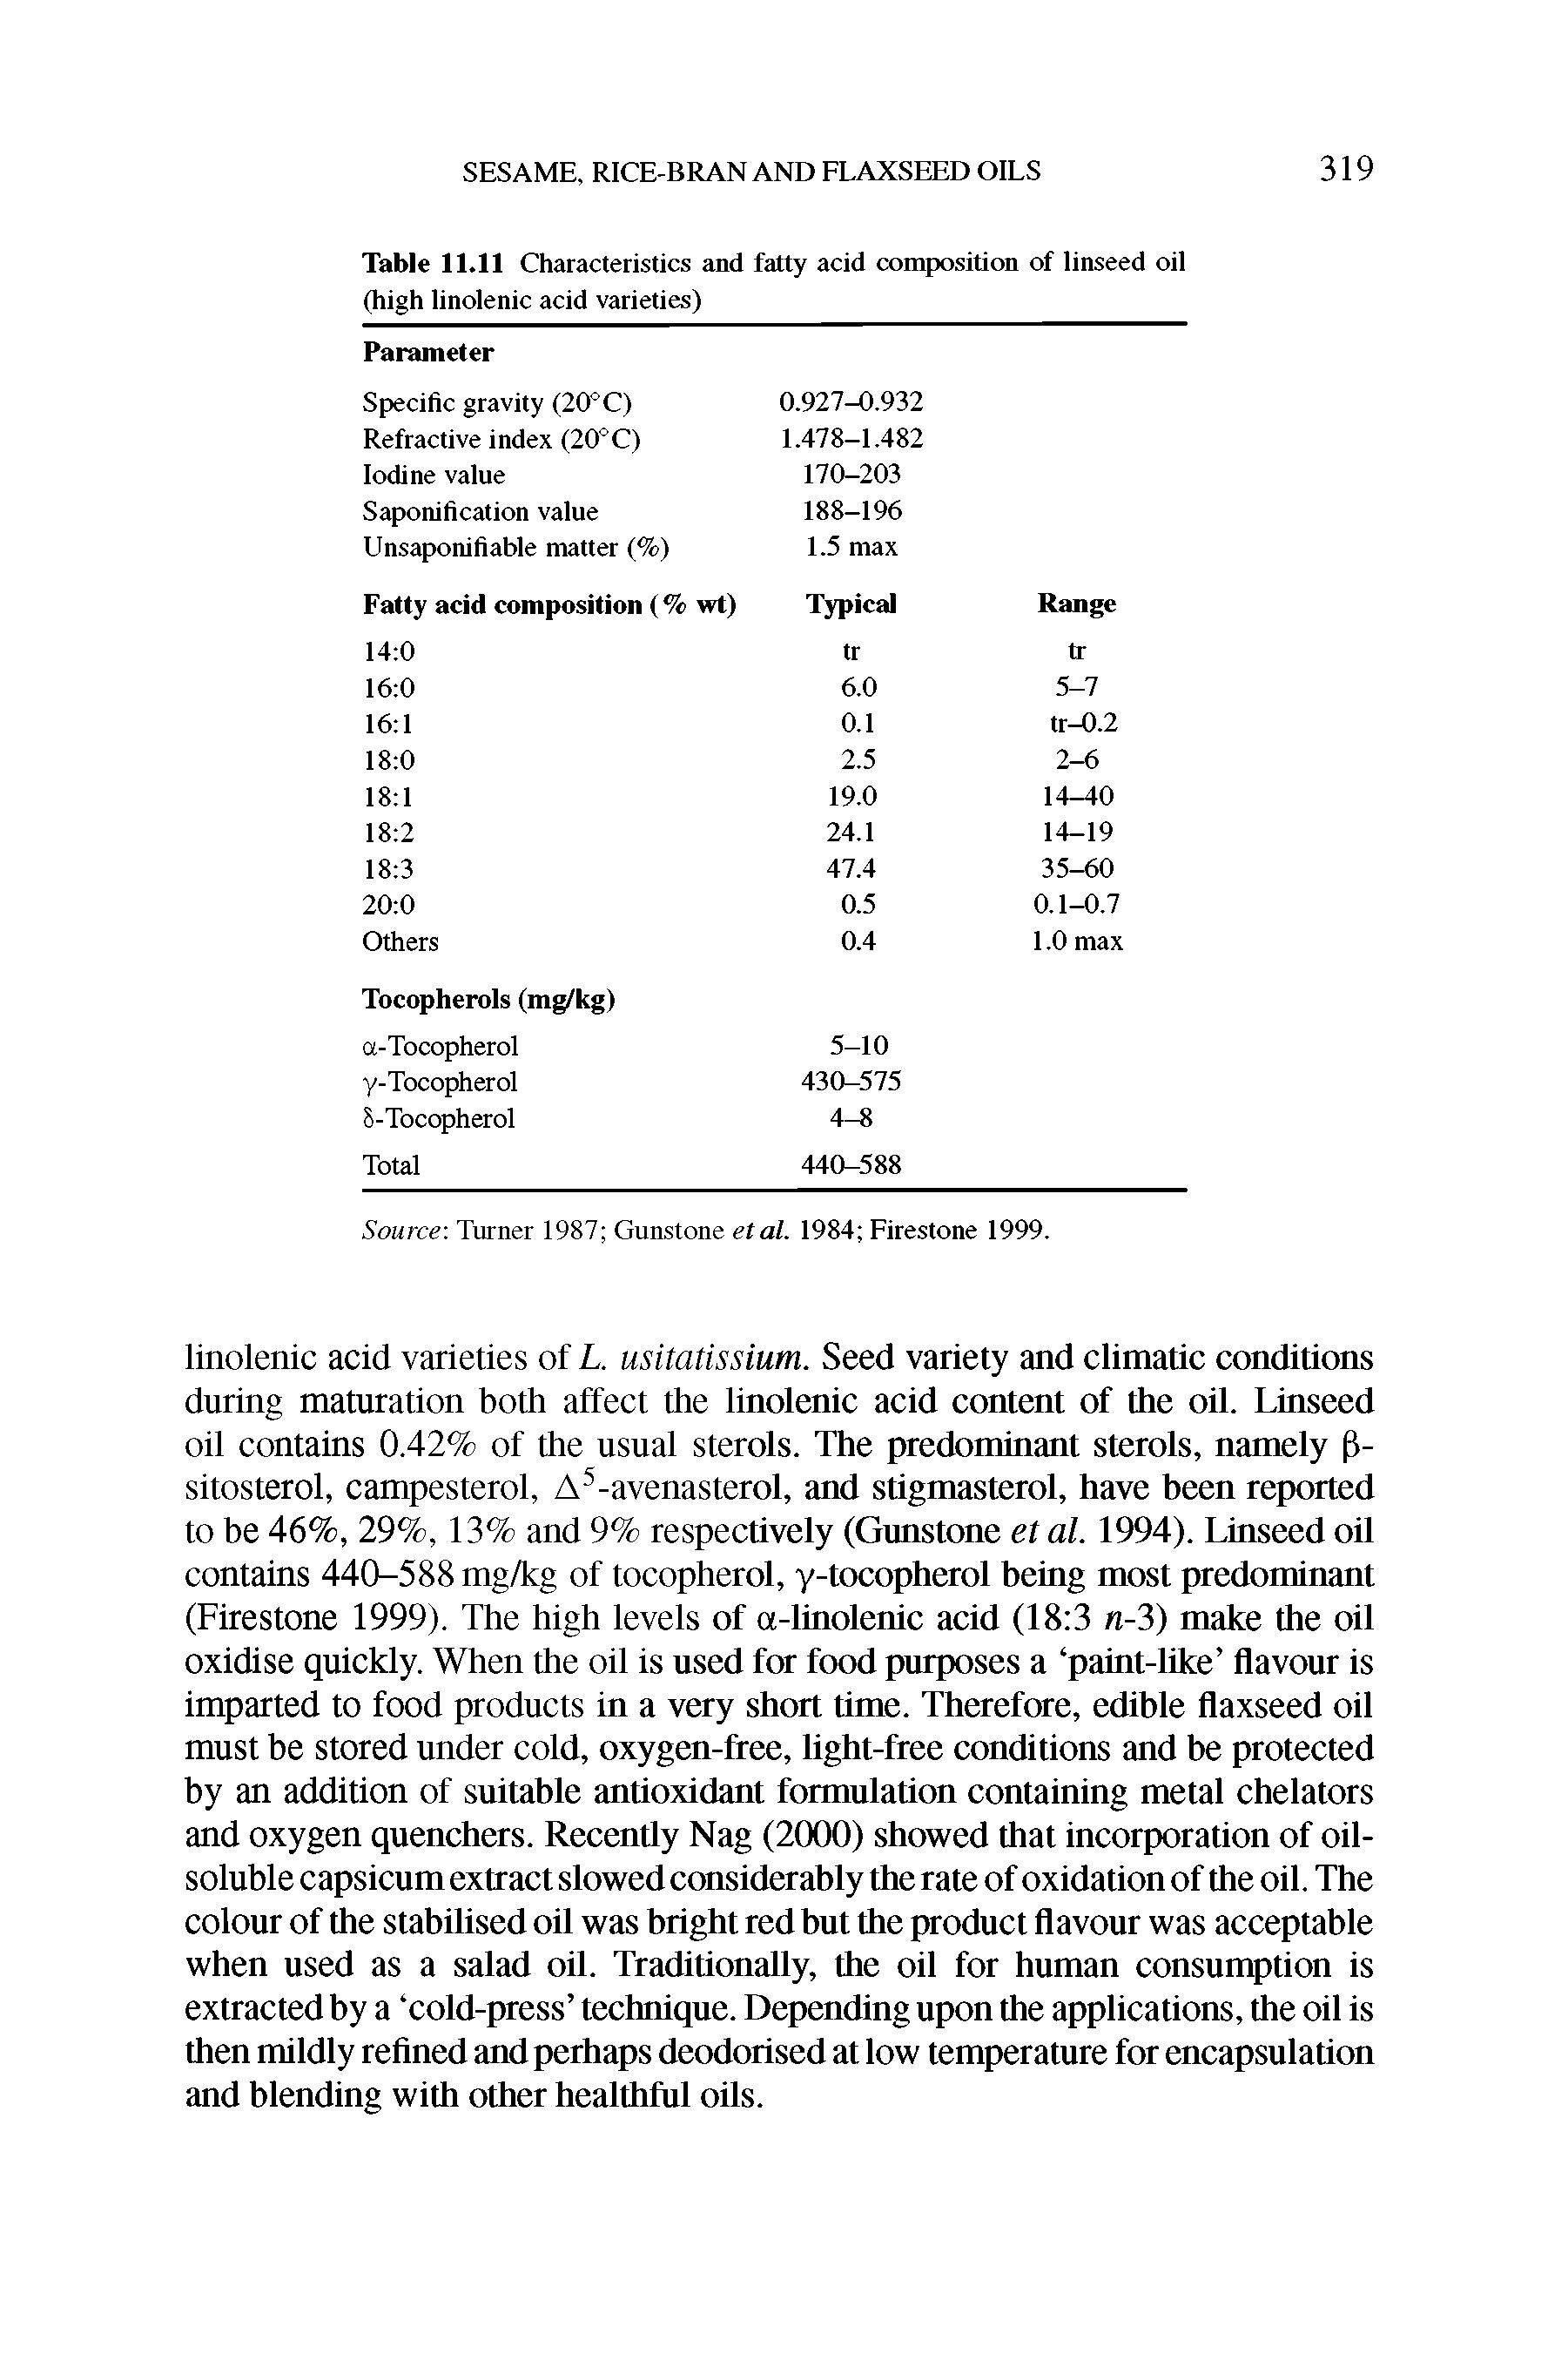 Table 11.11 Characteristics and fatty acid composition of linseed oil (high linolenic acid varieties)...